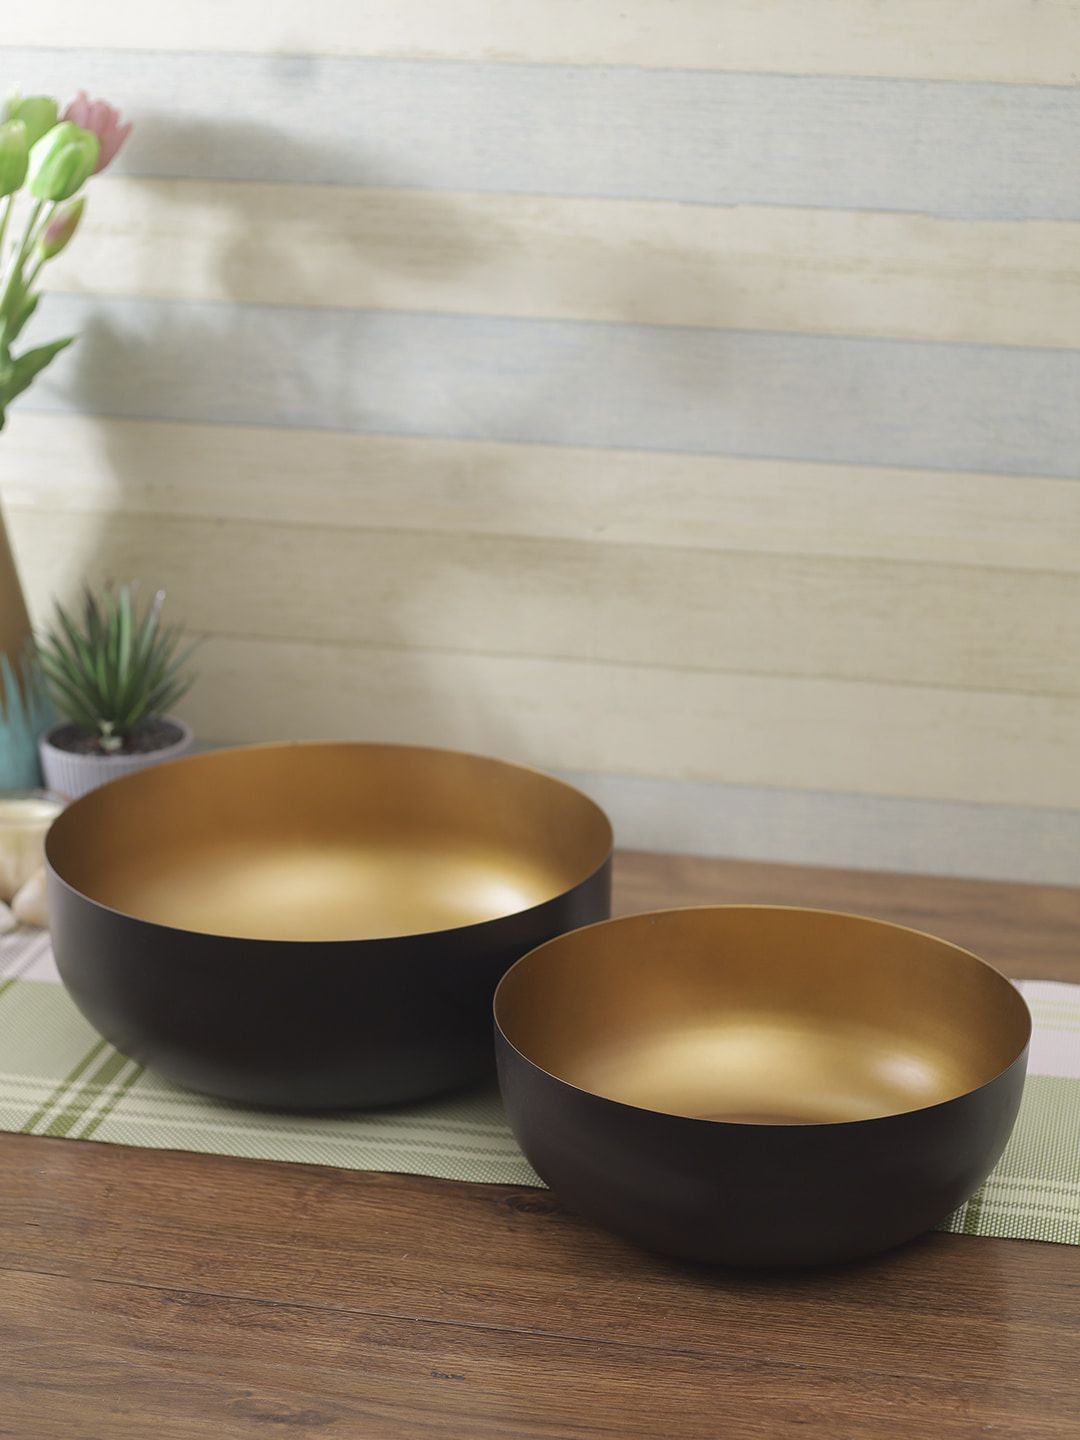 Aapno Rajasthan Set of 2 Black & Gold-Toned Solid Serving Bowls Price in India